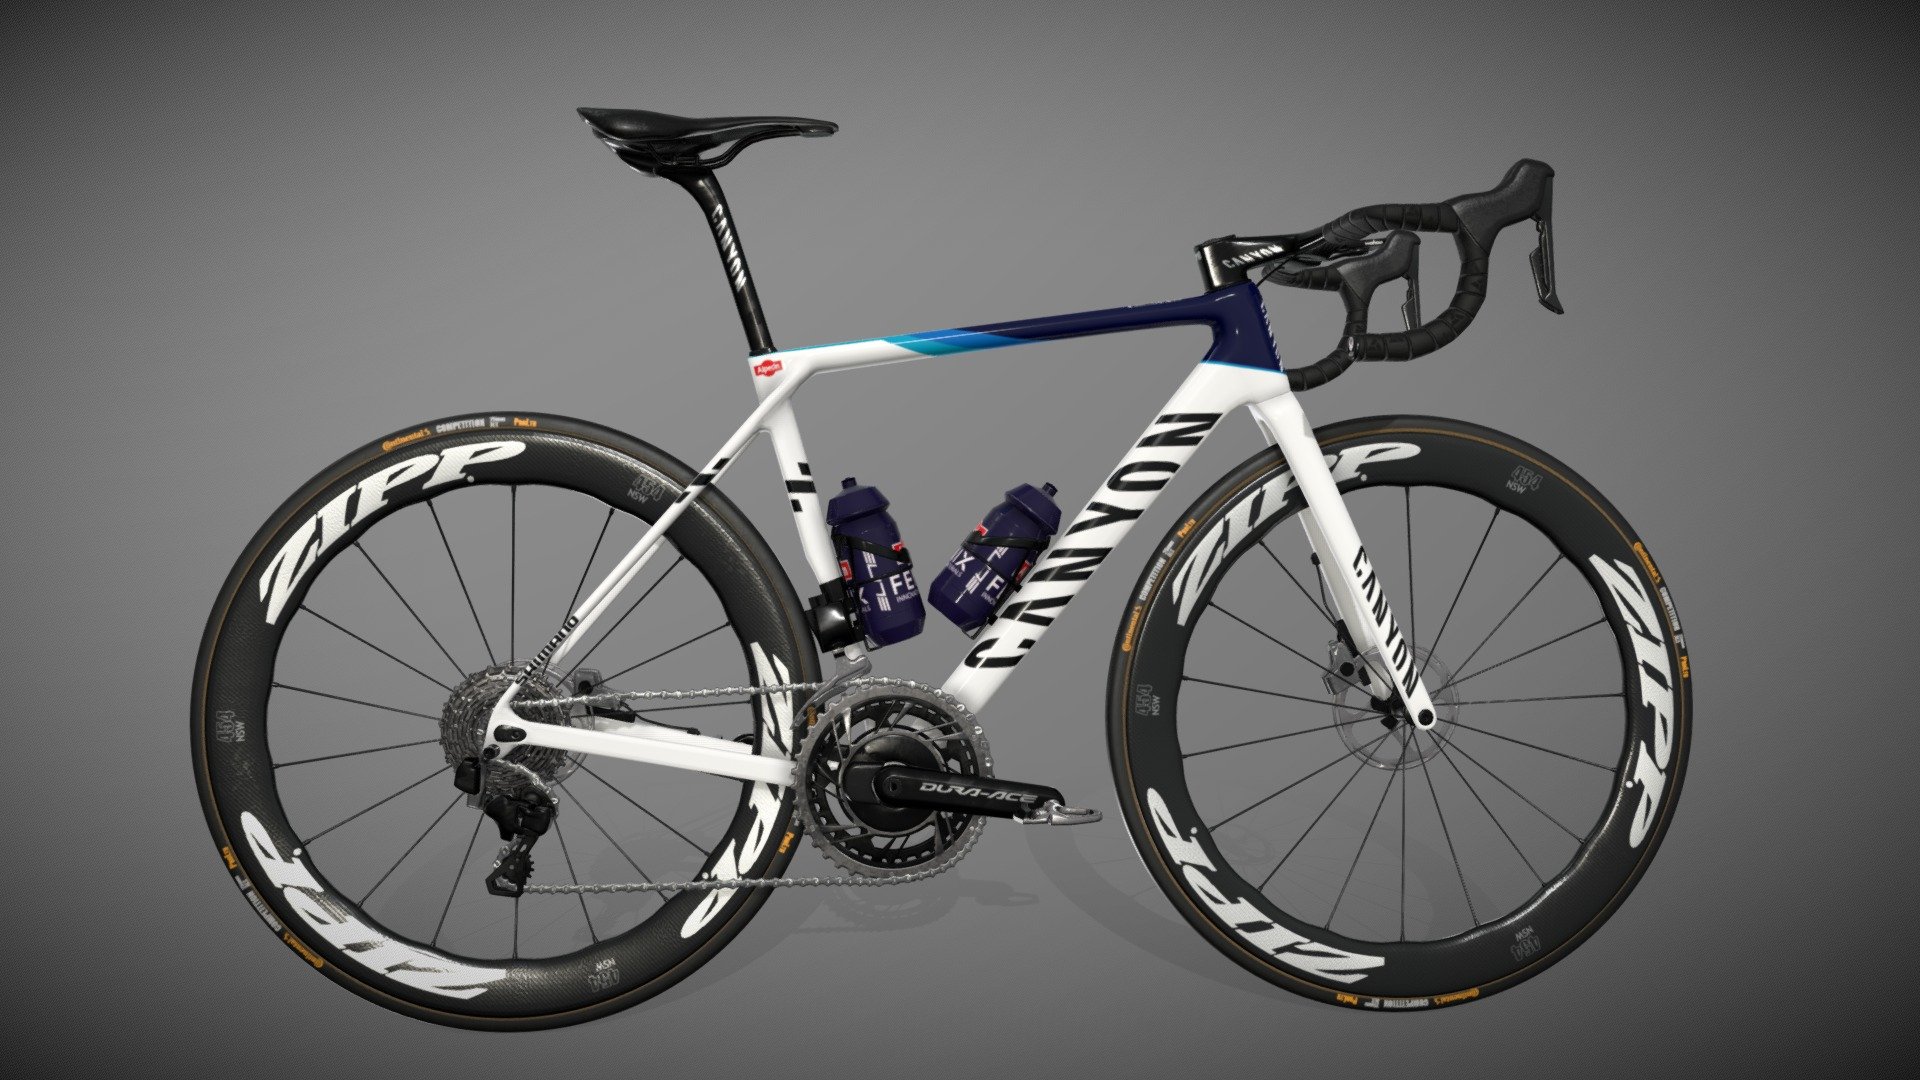 Roadbike Canyon Ultimate CF SLX OF FENIX ALPECIN Mathieu van der Poel

3D model of Canyon Ultimate CF SLX of Mathieu van der Poel FENIX ALPECIN Procycling Team
3D model made in 3ds max and BLENDER, UV in RIZOMUV, textured in Substance painter and photoshop.
Rendered in Marmoset Toolbag. Also in Vray,  CYCLES and sketchfab.
Polys - 292627 
Verts - 295211 - Canyon Ultimate CF SLX FENIX ALPECIN - Buy Royalty Free 3D model by Dav1d- 3d model